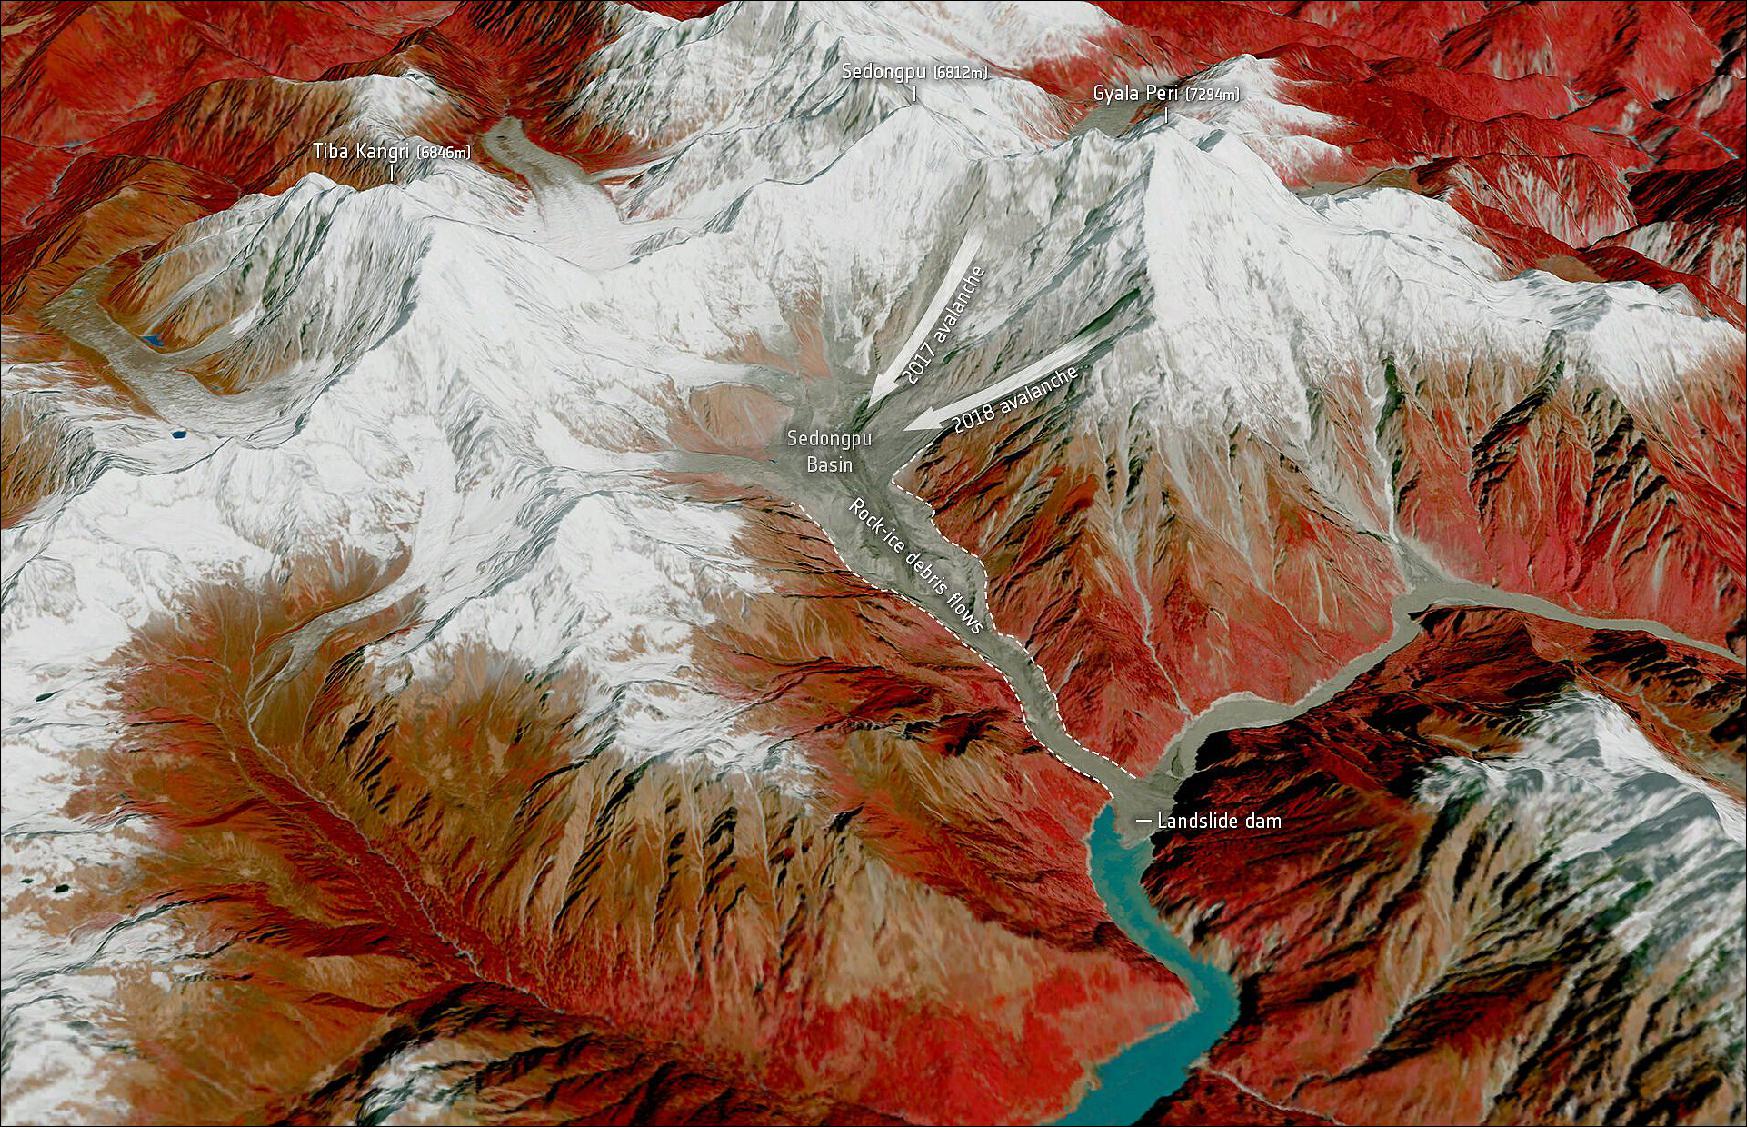 Figure 51: Glacier avalanches in the Sedongpu region, China. For several years now, scientists have known that a glacier can actually detach from the mountain rock and gush down to the valley at speeds of up to 300 km an hour as a fluid ice-rock avalanche. The image, based on data from the Copernicus Sentinel-2 mission, shows the traces of ice/rock avalanches that occurred in 2017 and 2018, resulting from vast flows of rock and ice that finally partly blocked a river in the valley below (image credit: ESA, the image contains modified Copernicus Sentinel-2 data (2017–18), processed by CCI Glacier team and ESA)